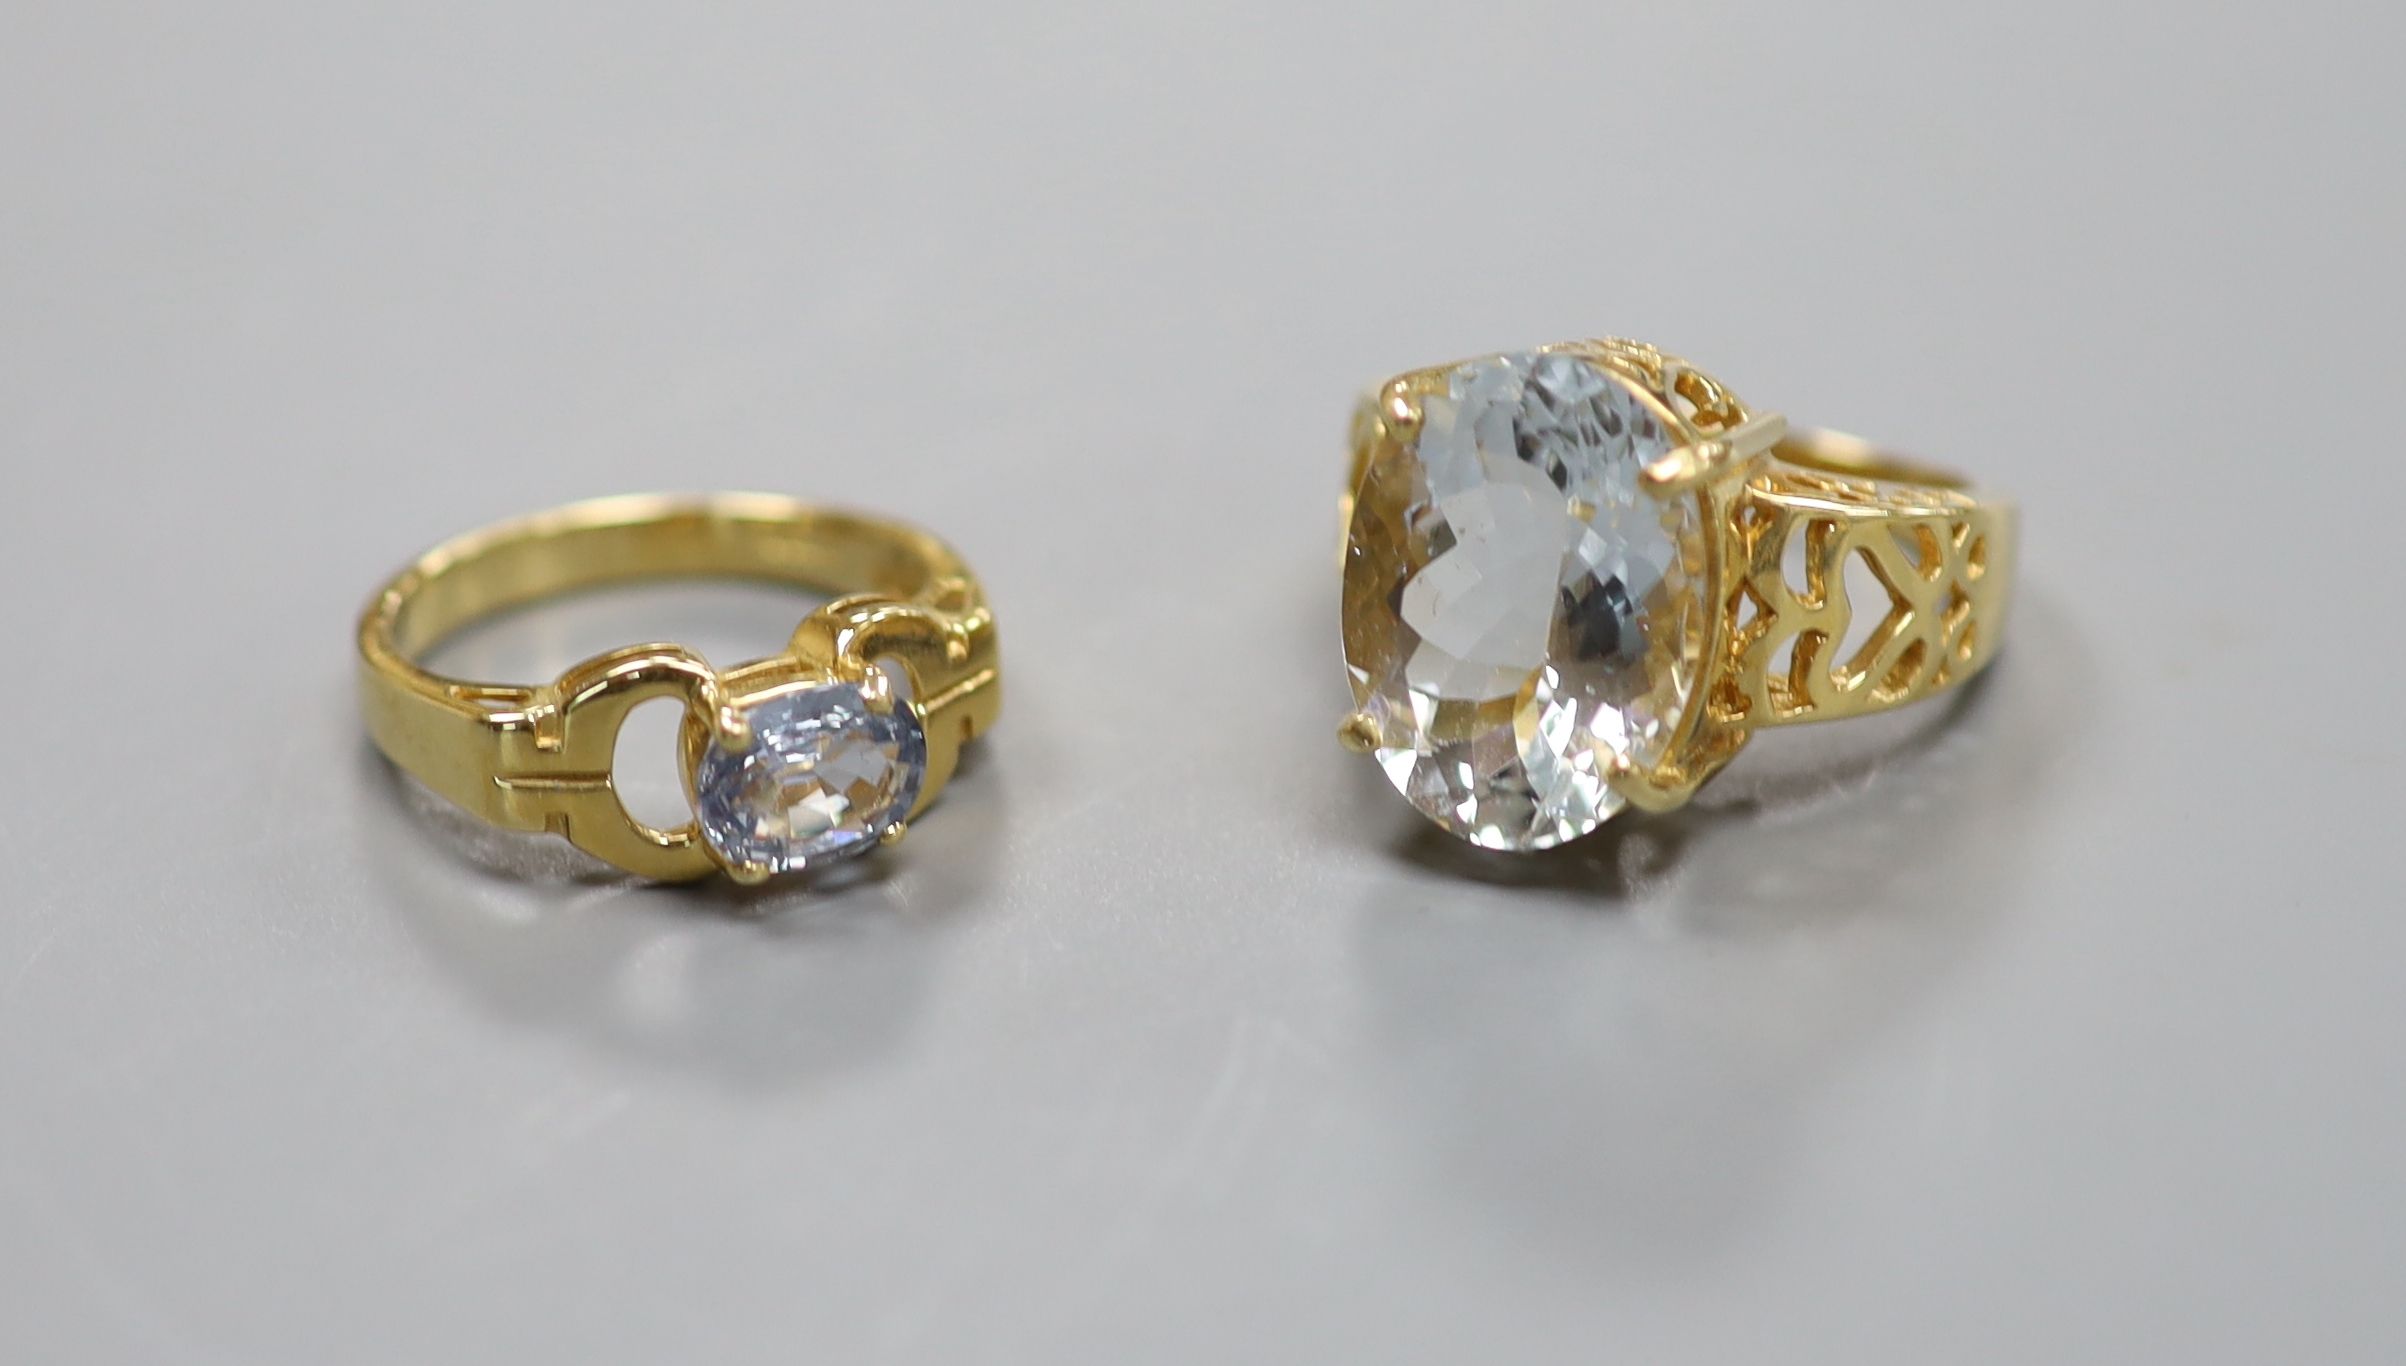 A pale aquamarine ring, pierced 18ct gold setting and shank and an 18ct gold and pale sapphire ring